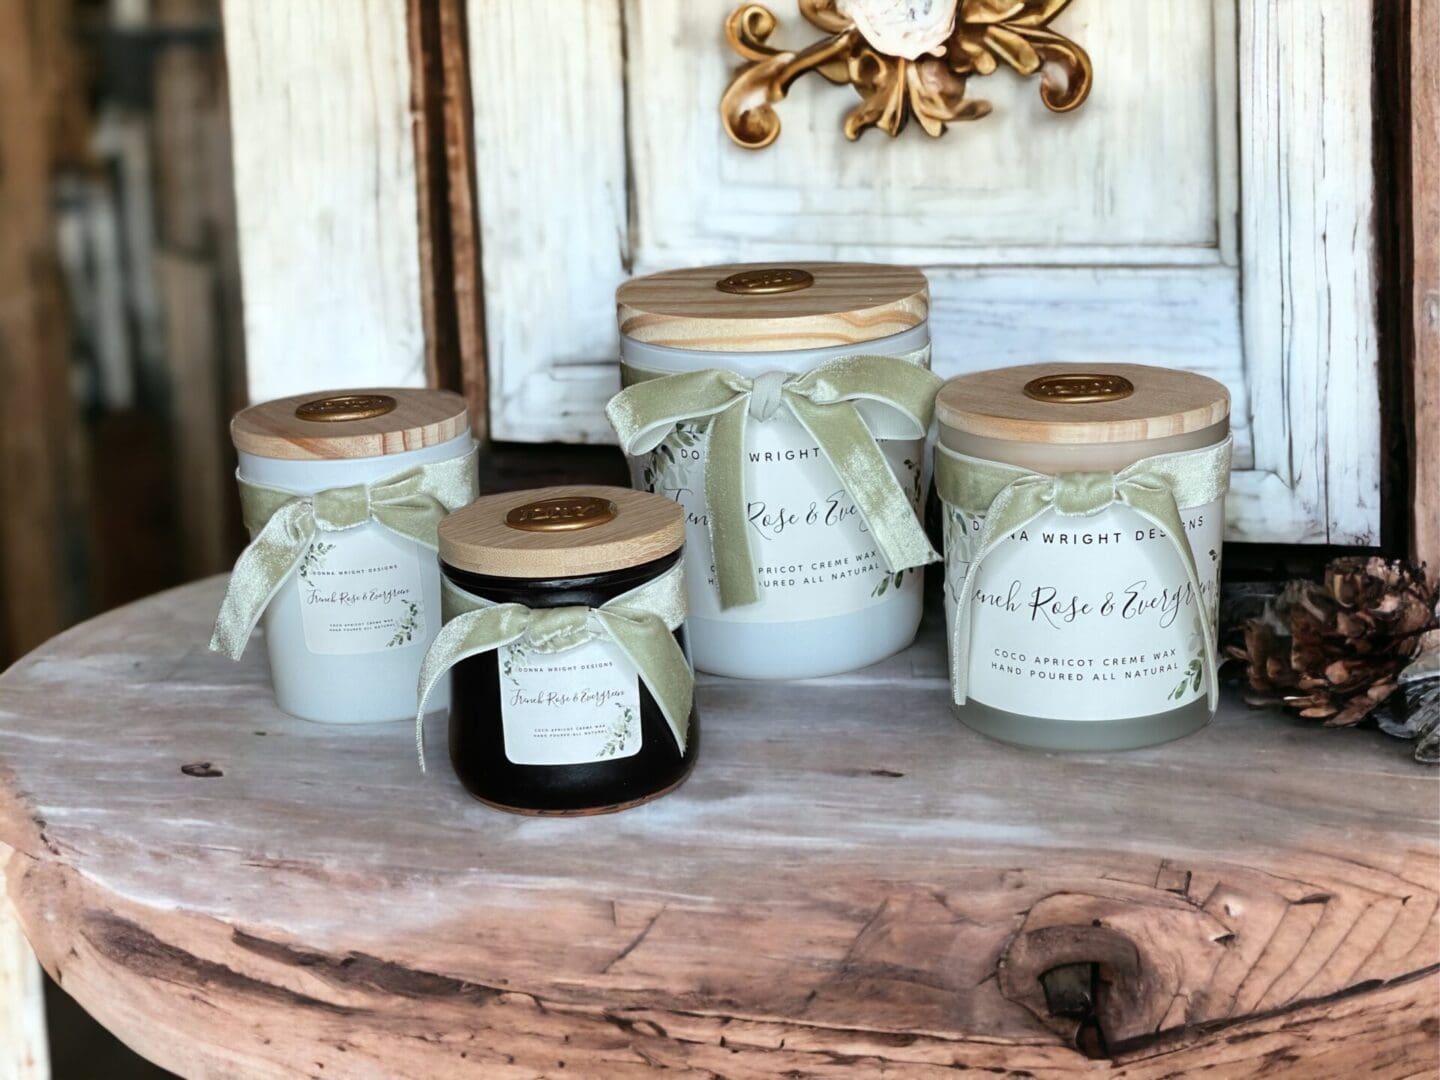 Donna Wright Designs Four scented French Rose & Evergreen candles with wooden lids on a rustic wooden table in front of a weathered white door. The candles are labeled with elegant script and feature a simple ribbon decoration.